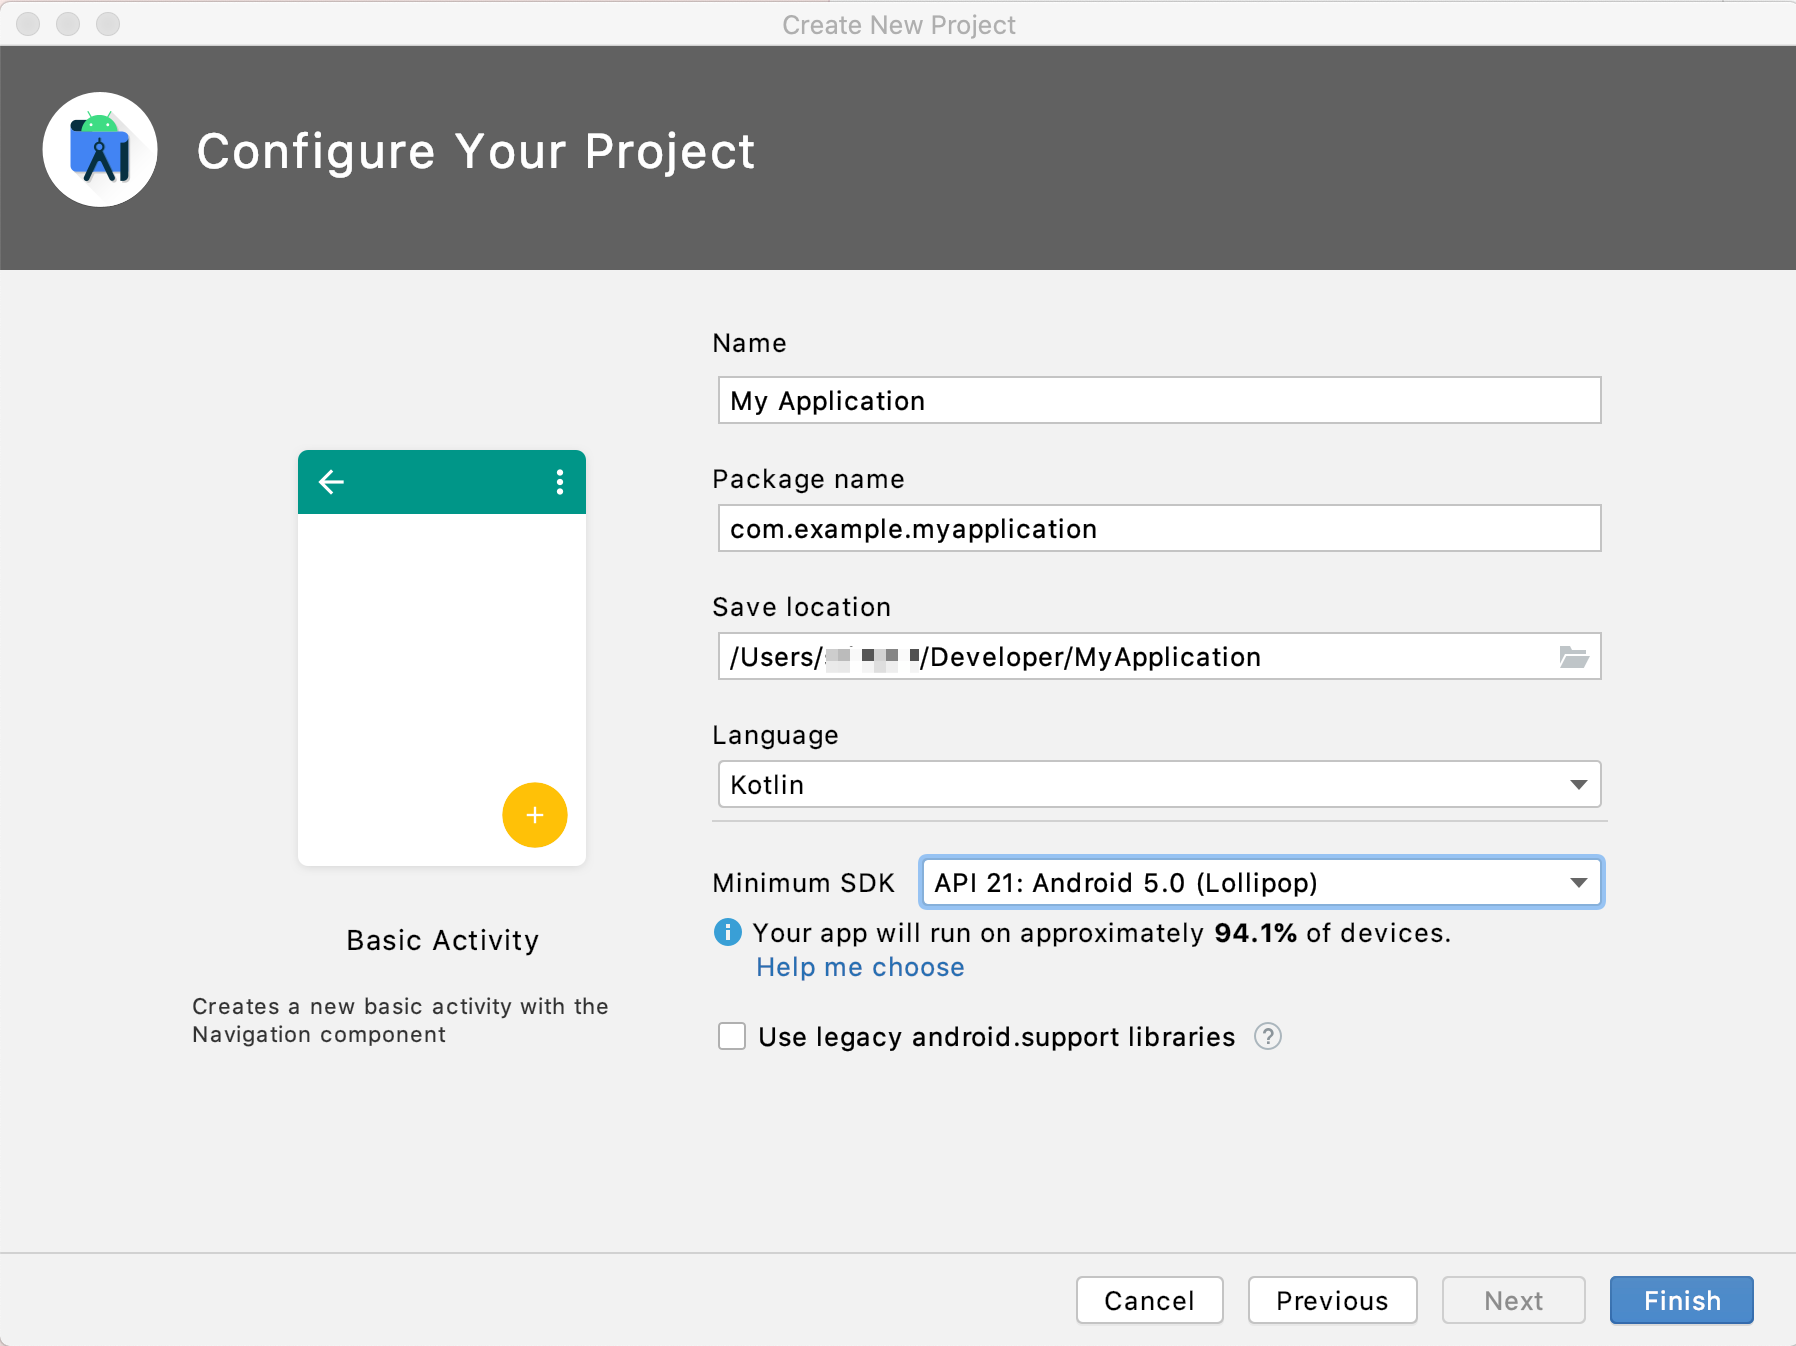 Configure Your Project screen from Android Studio. Set the minimum Android SDK version to API 21.